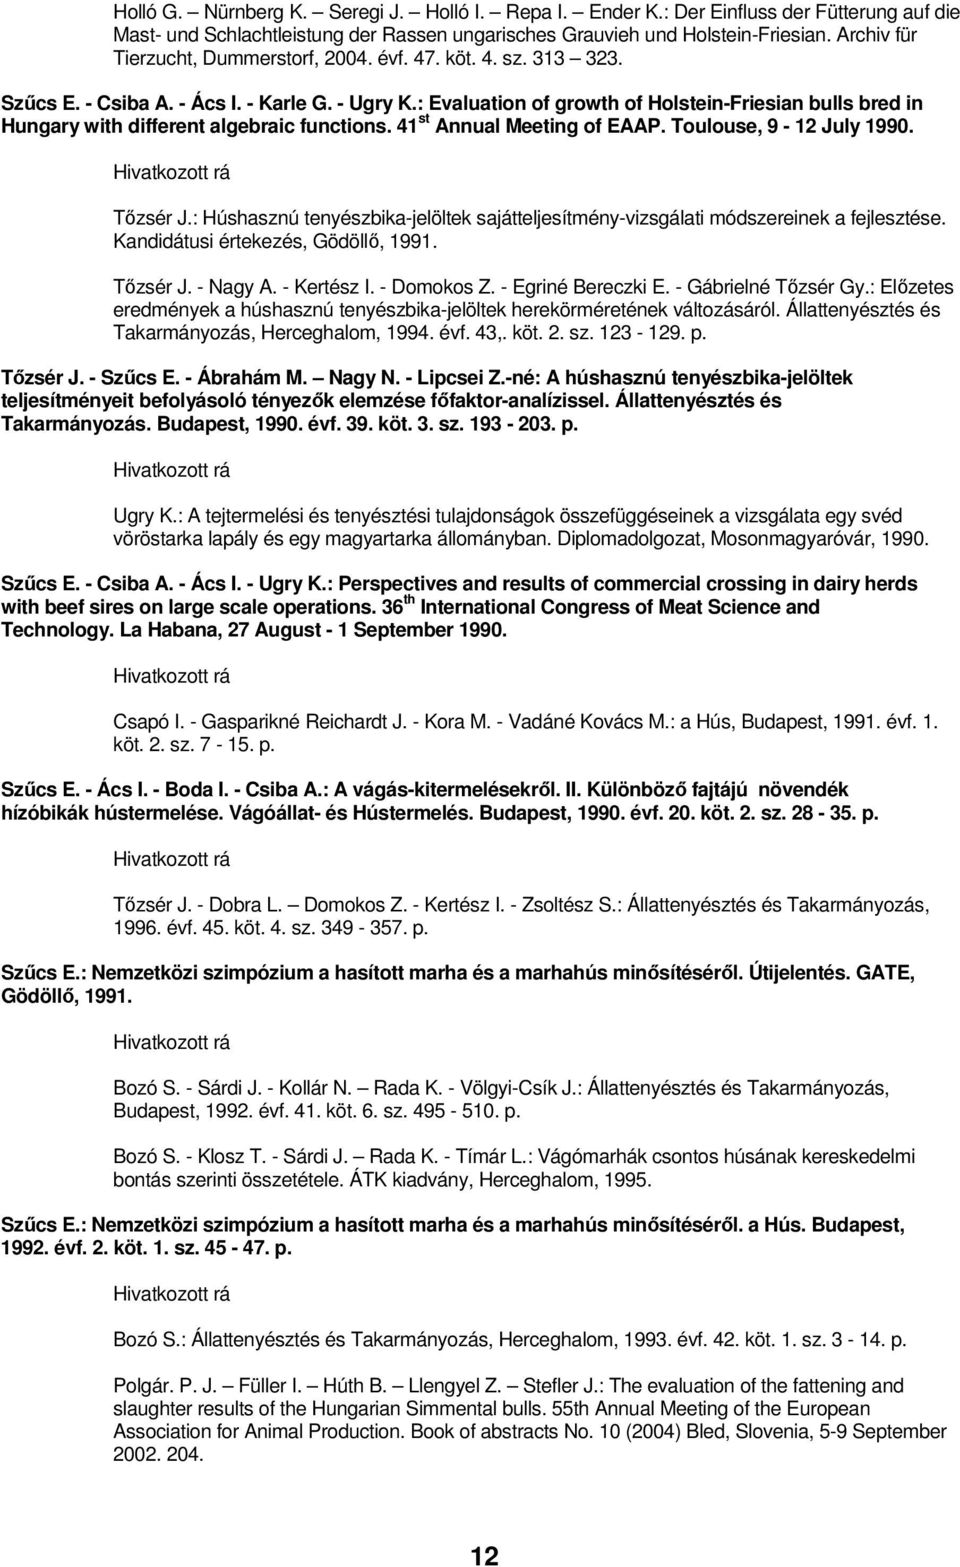 : Evaluation of growth of Holstein-Friesian bulls bred in Hungary with different algebraic functions. 41 st Annual Meeting of EAAP. Toulouse, 9-12 July 1990. Tızsér J.